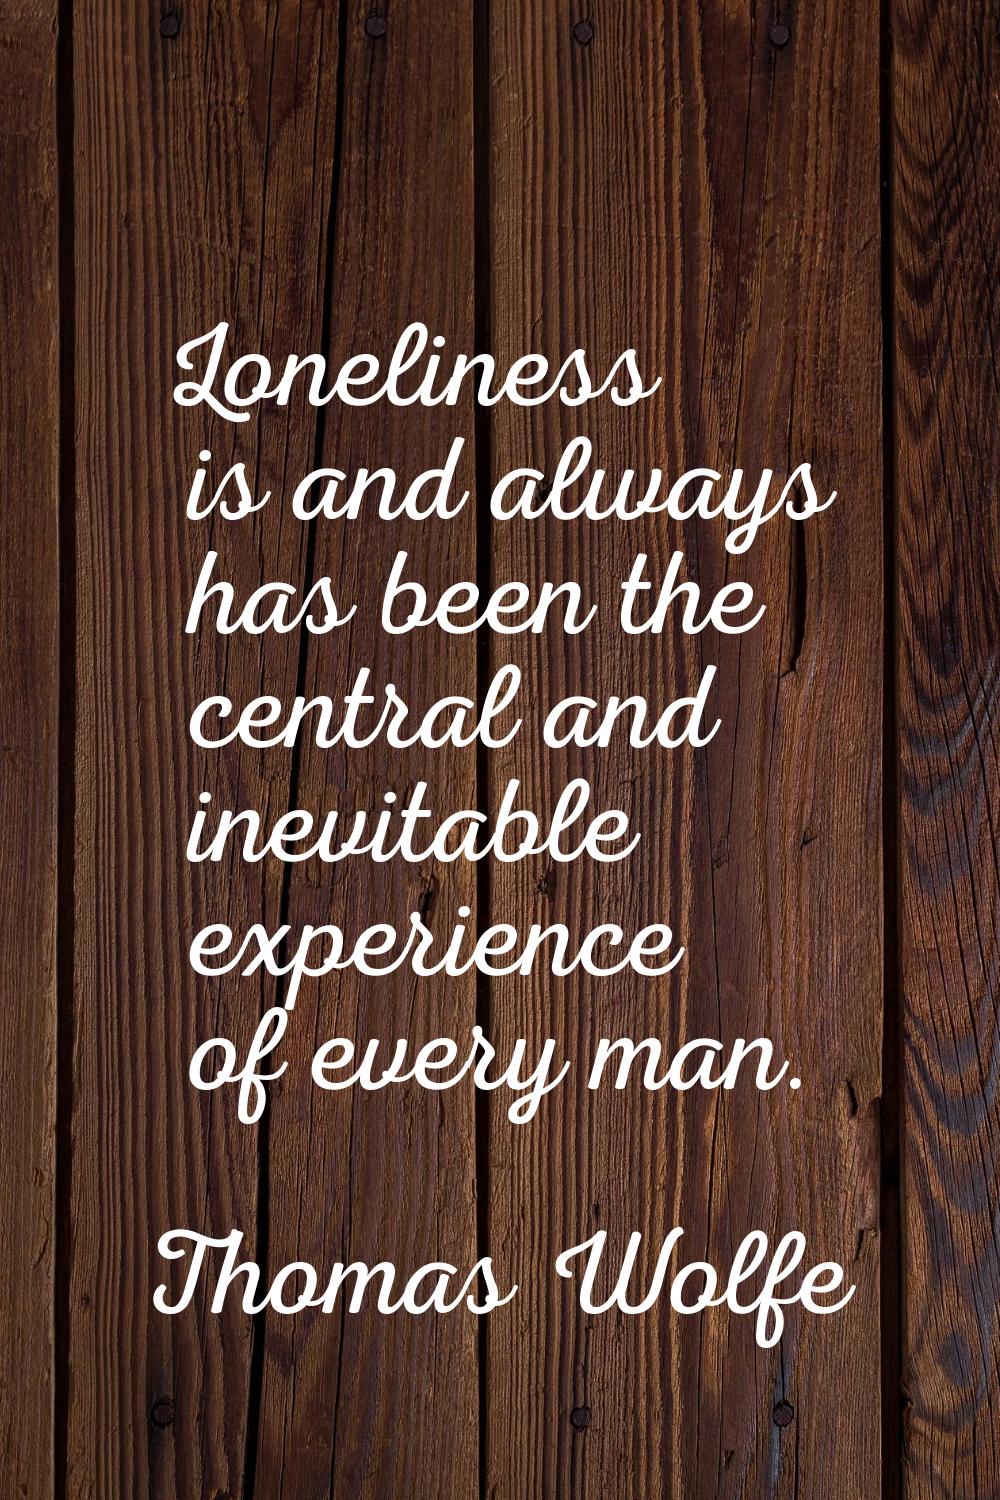 Loneliness is and always has been the central and inevitable experience of every man.